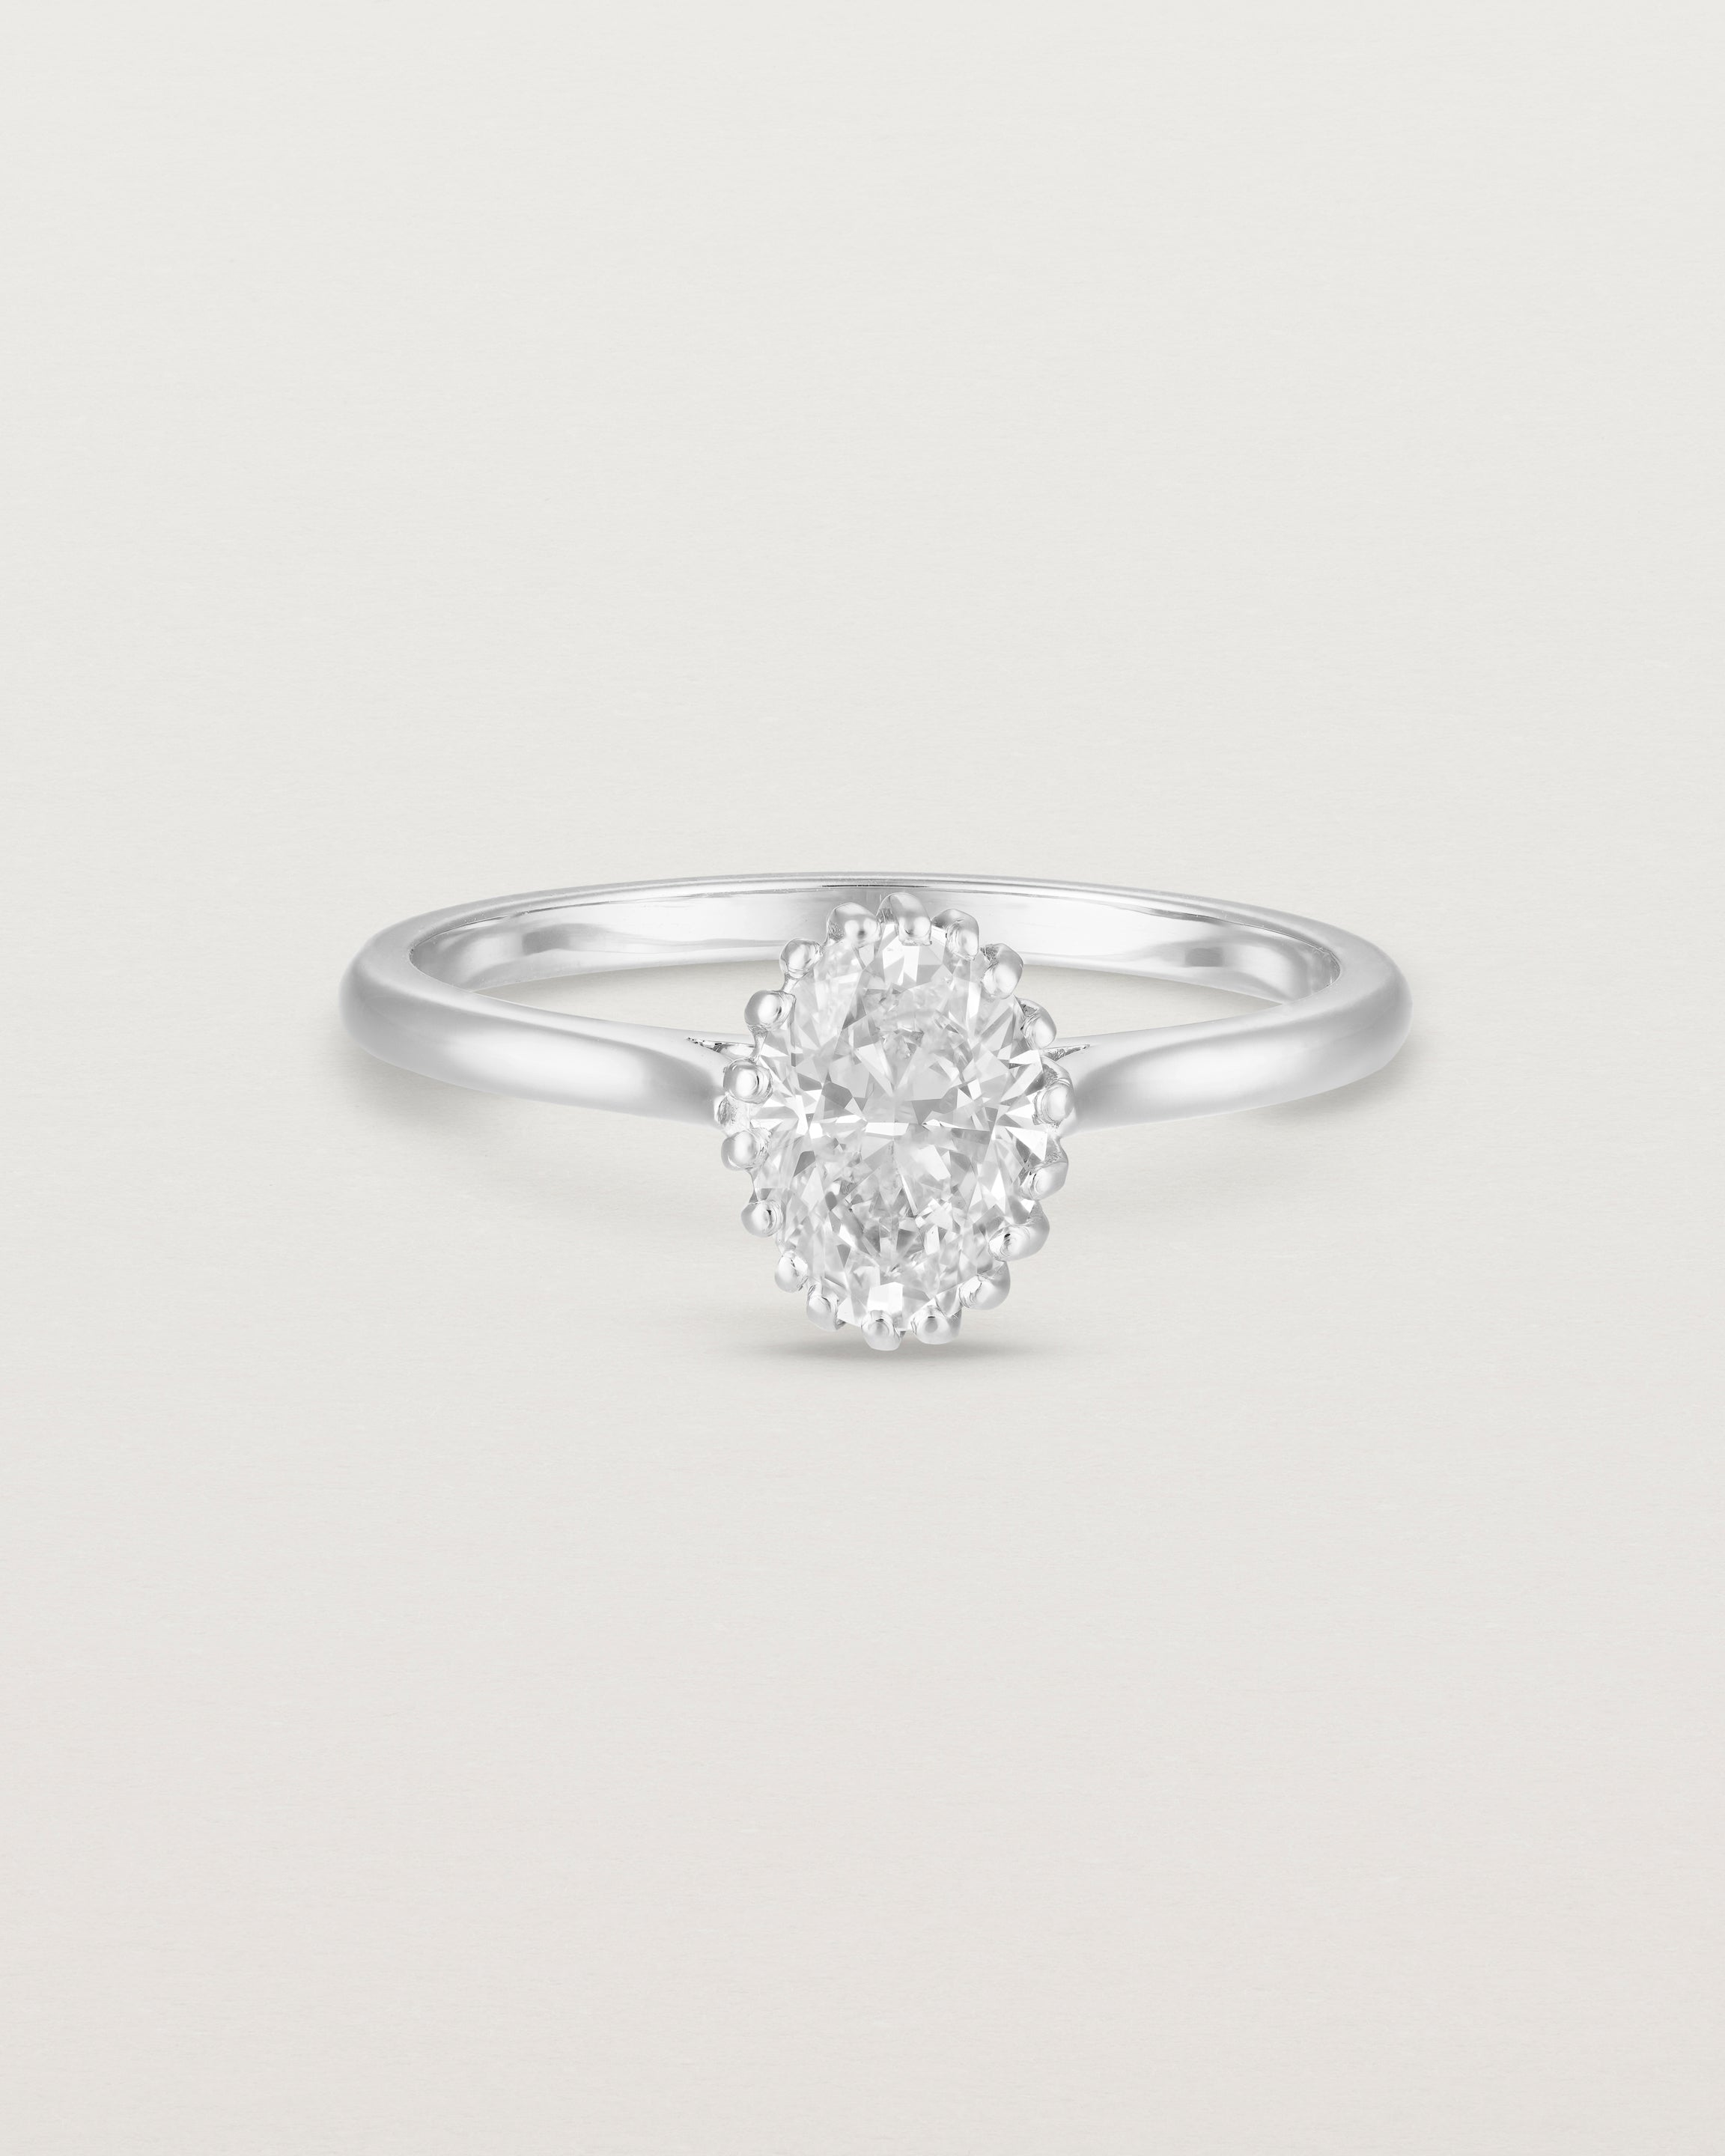 Front view of the Meroë Oval Solitaire | Laboratory Grown Diamond in white gold.